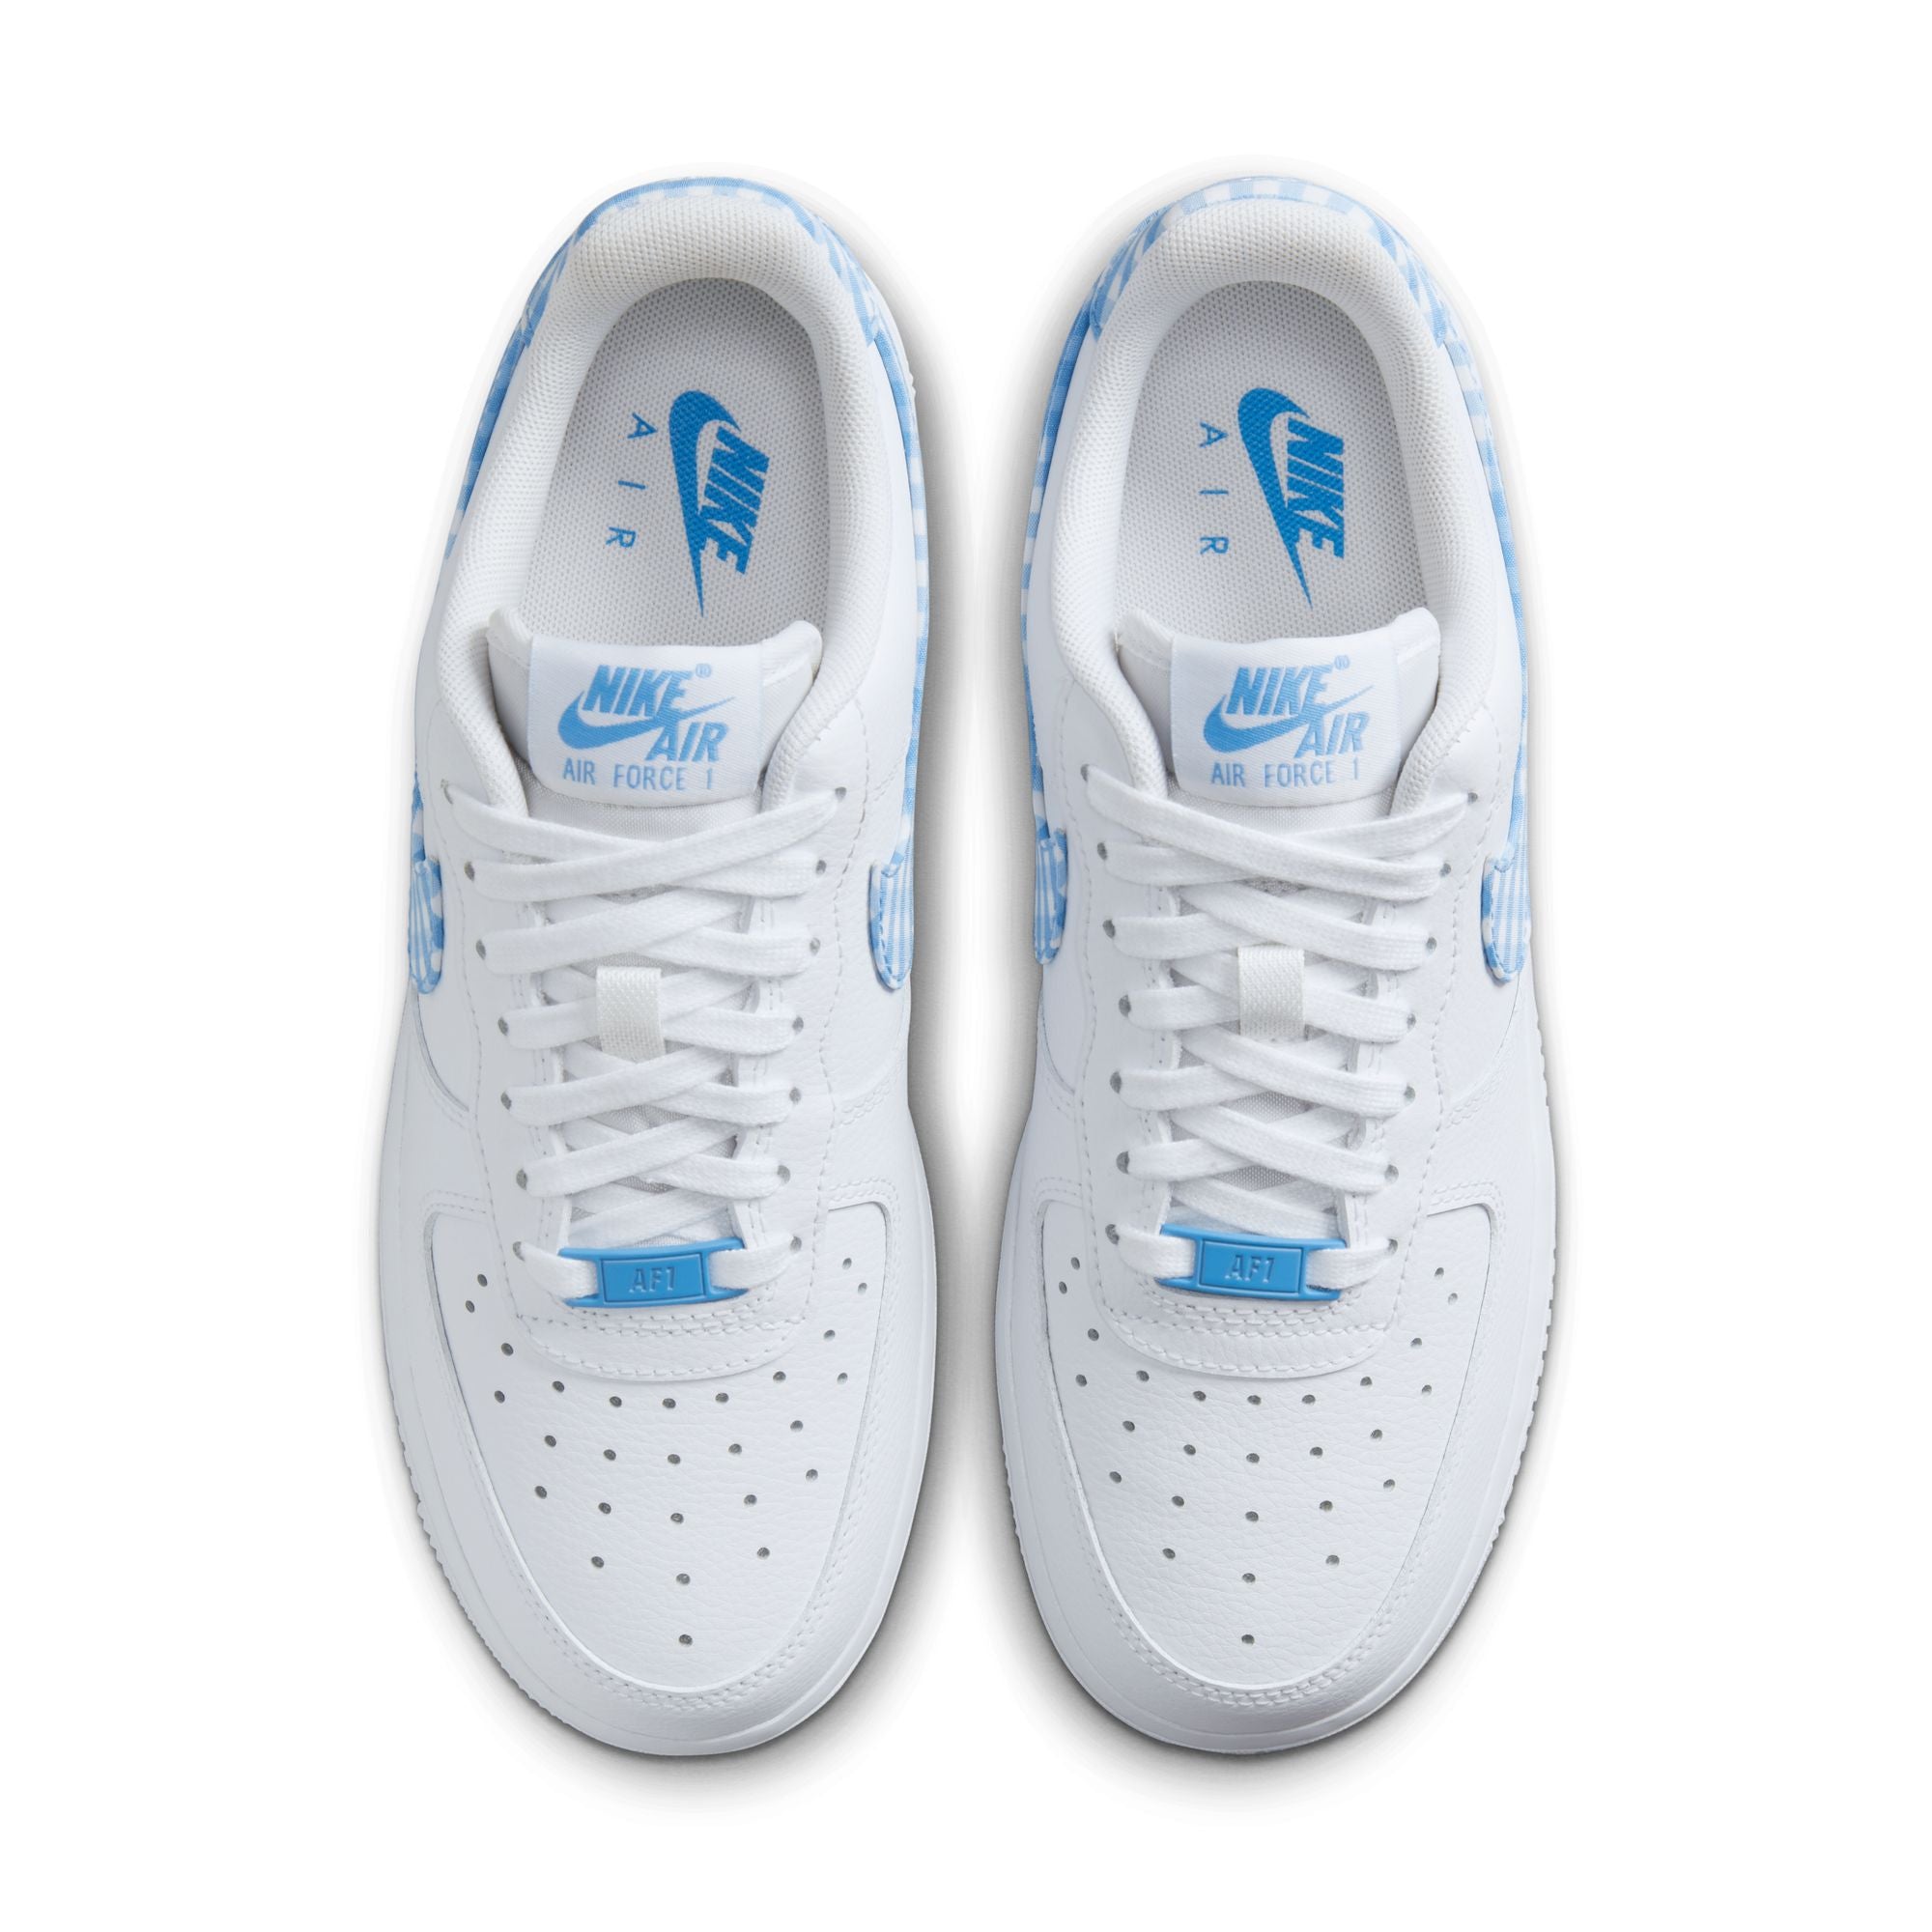 Nike Sportswear AIR FORCE 1 07 TREND - Trainers - white/universal